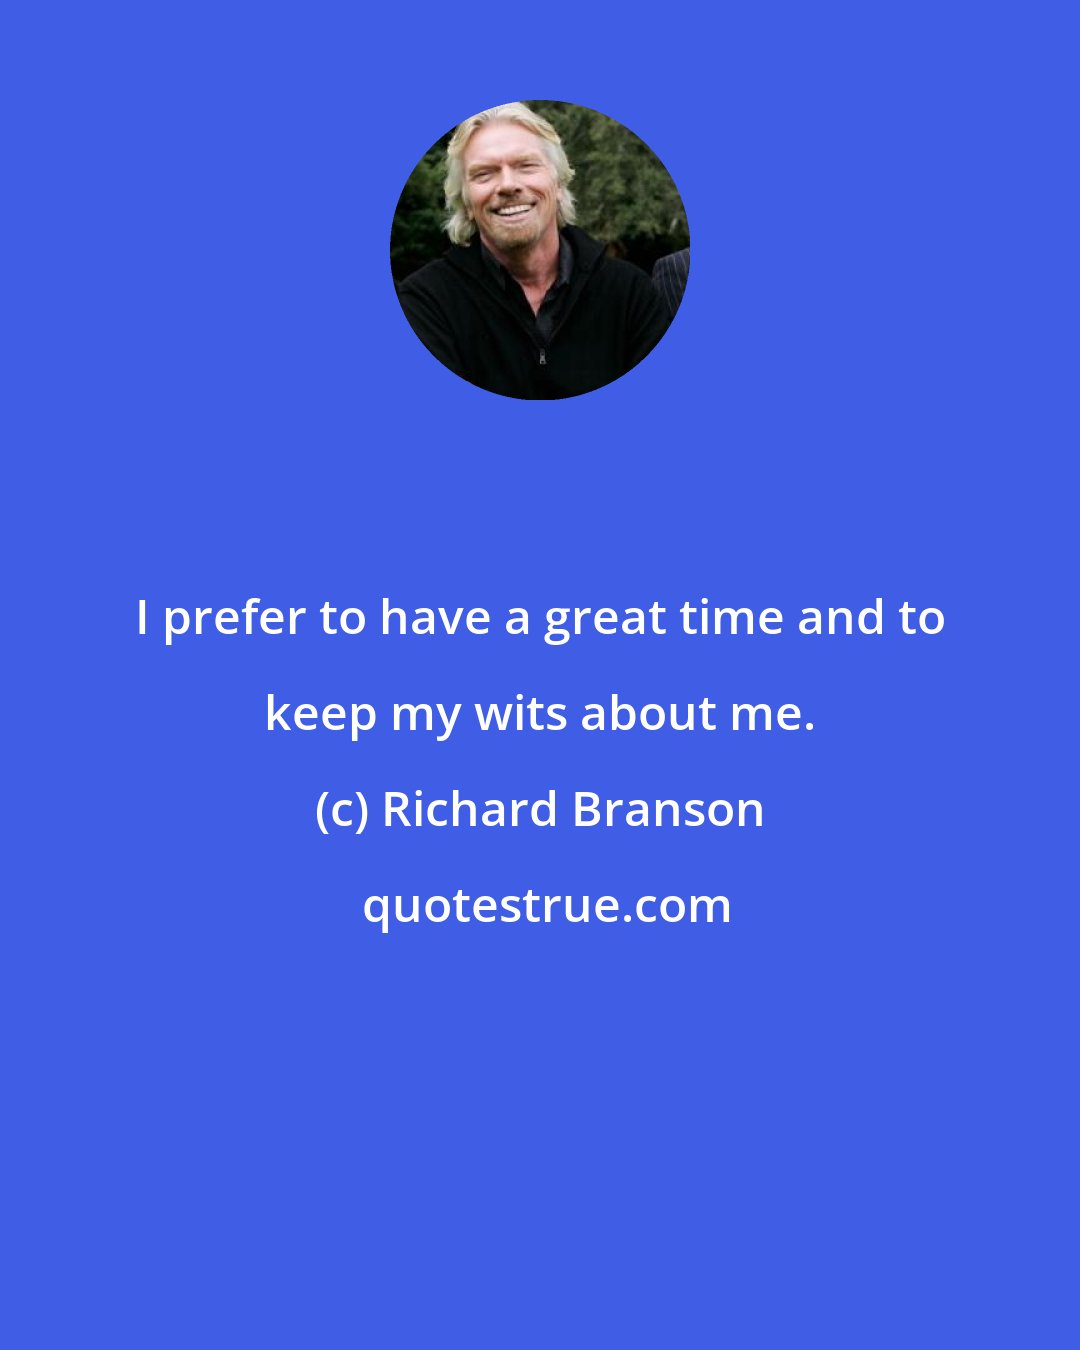 Richard Branson: I prefer to have a great time and to keep my wits about me.